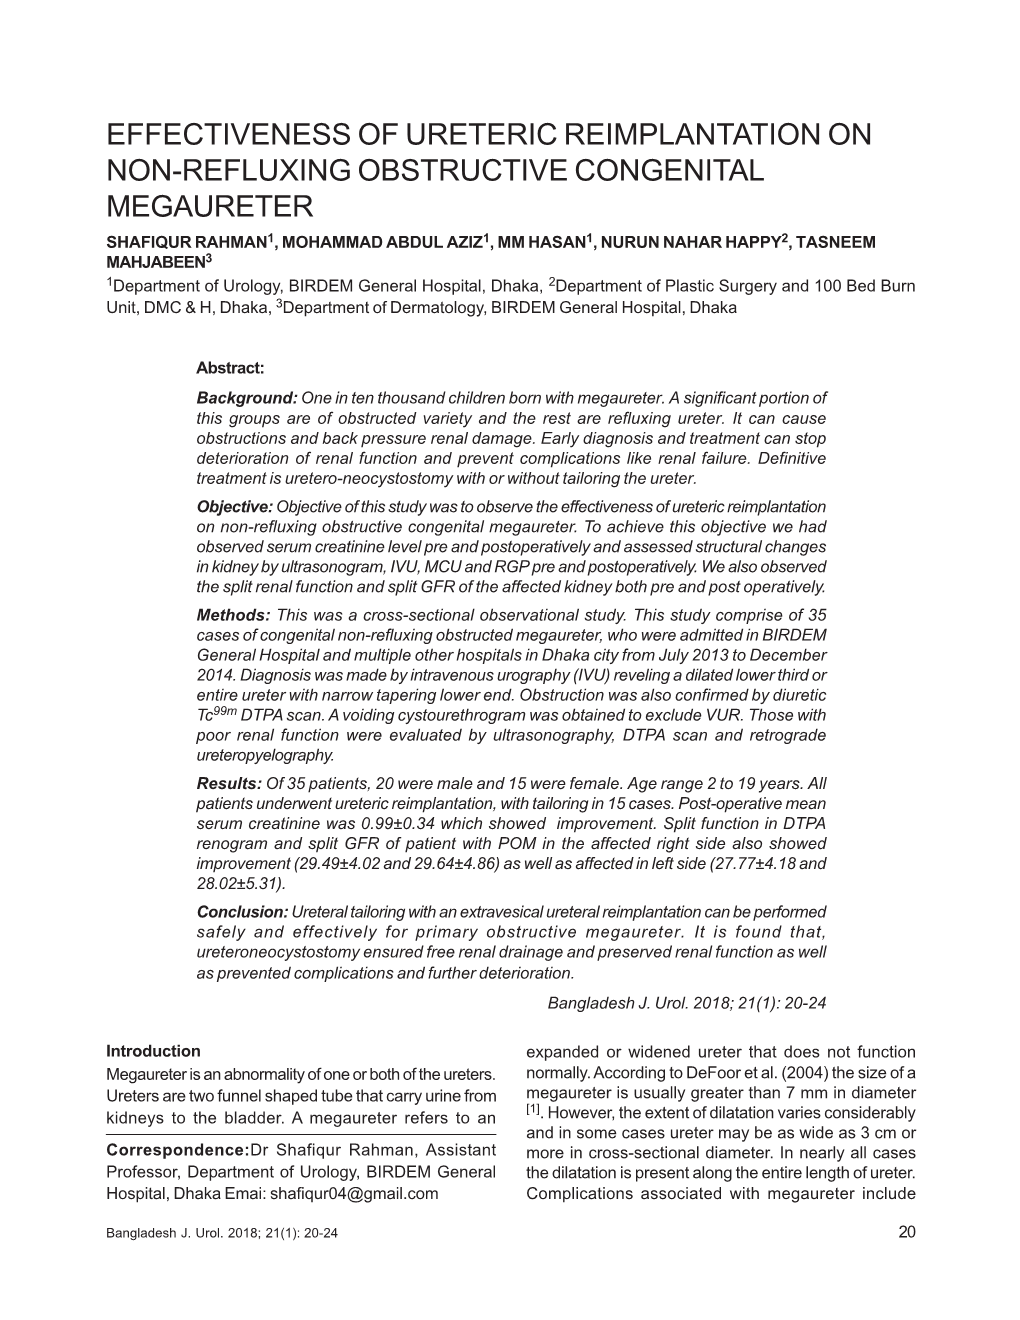 Effectiveness of Ureteric Reimplantation on Non-Refluxing Obstructive